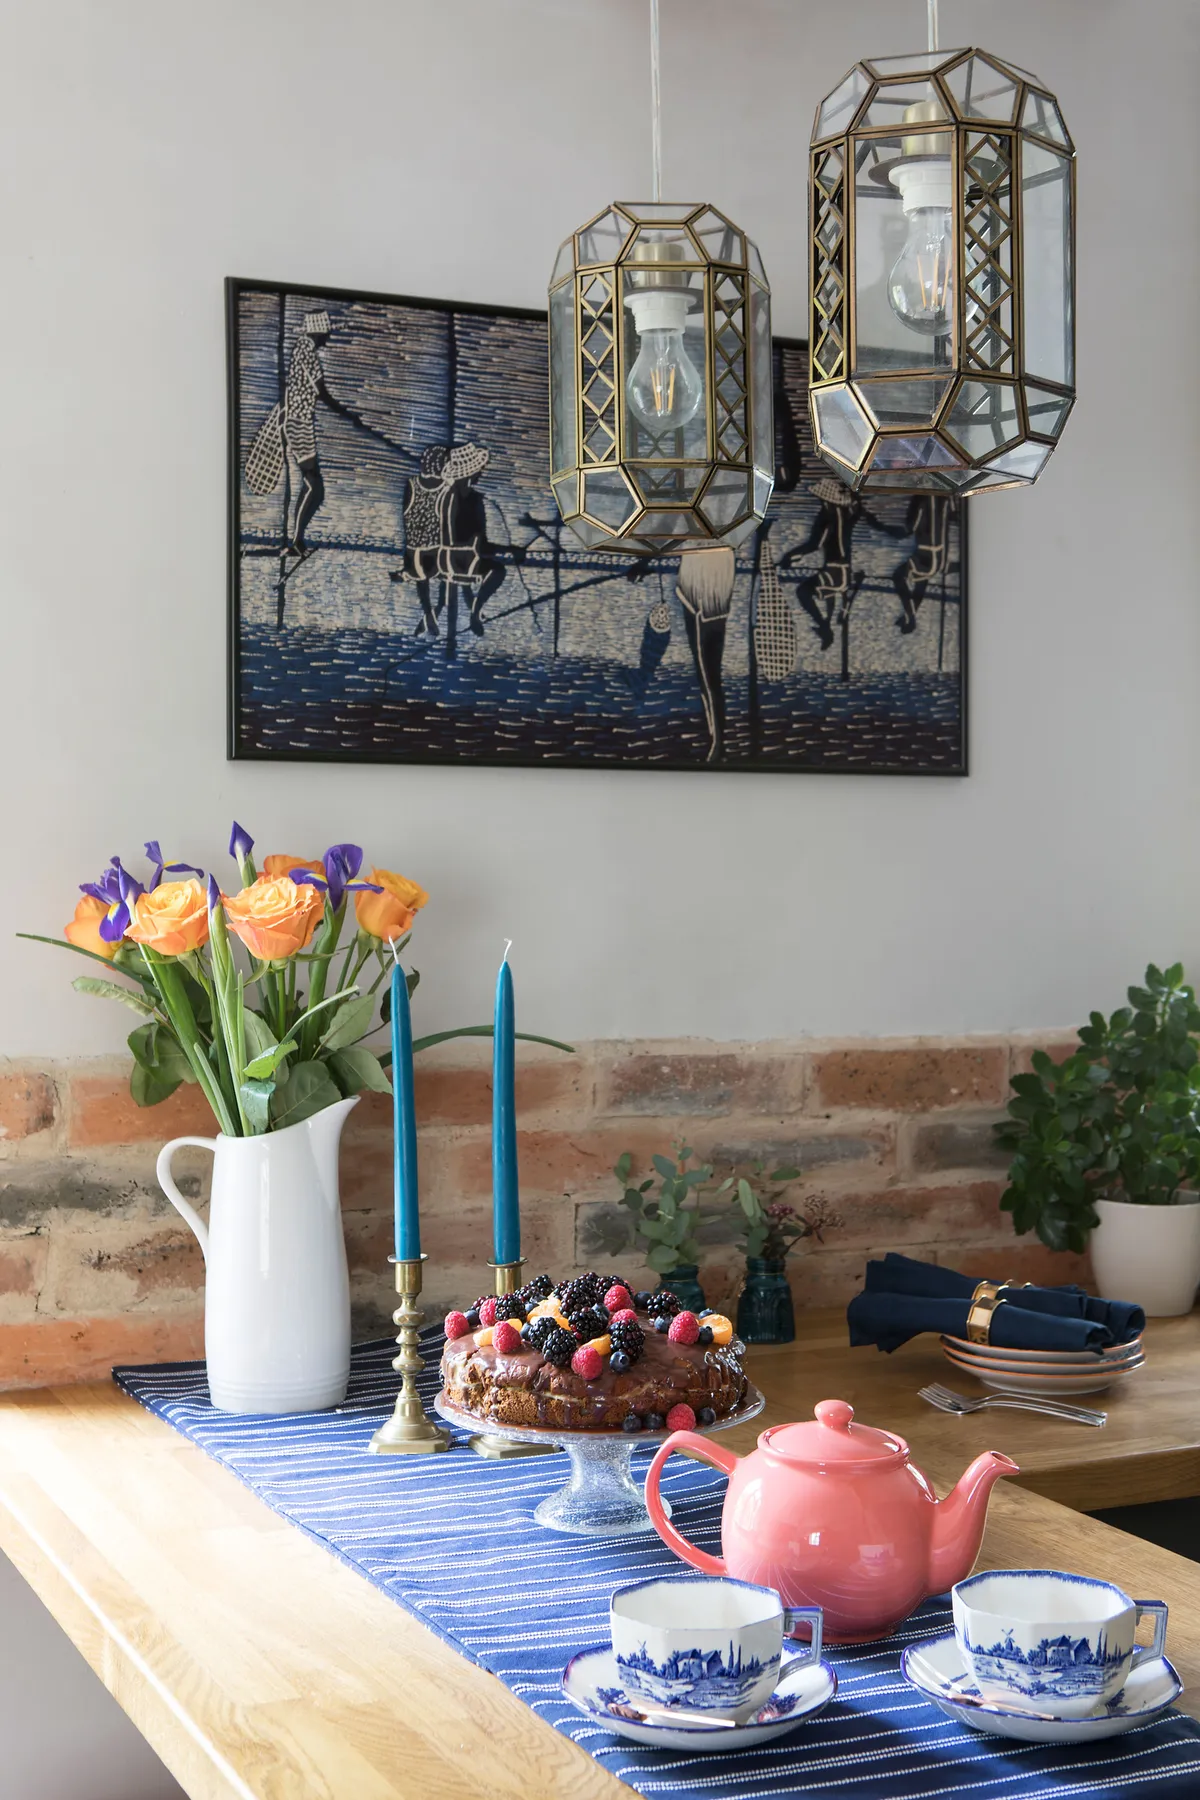 ‘While decorating our UK house, dark blue and light grey became the colours that tied rooms together and I wanted to carry that through to the kitchen' says Dace